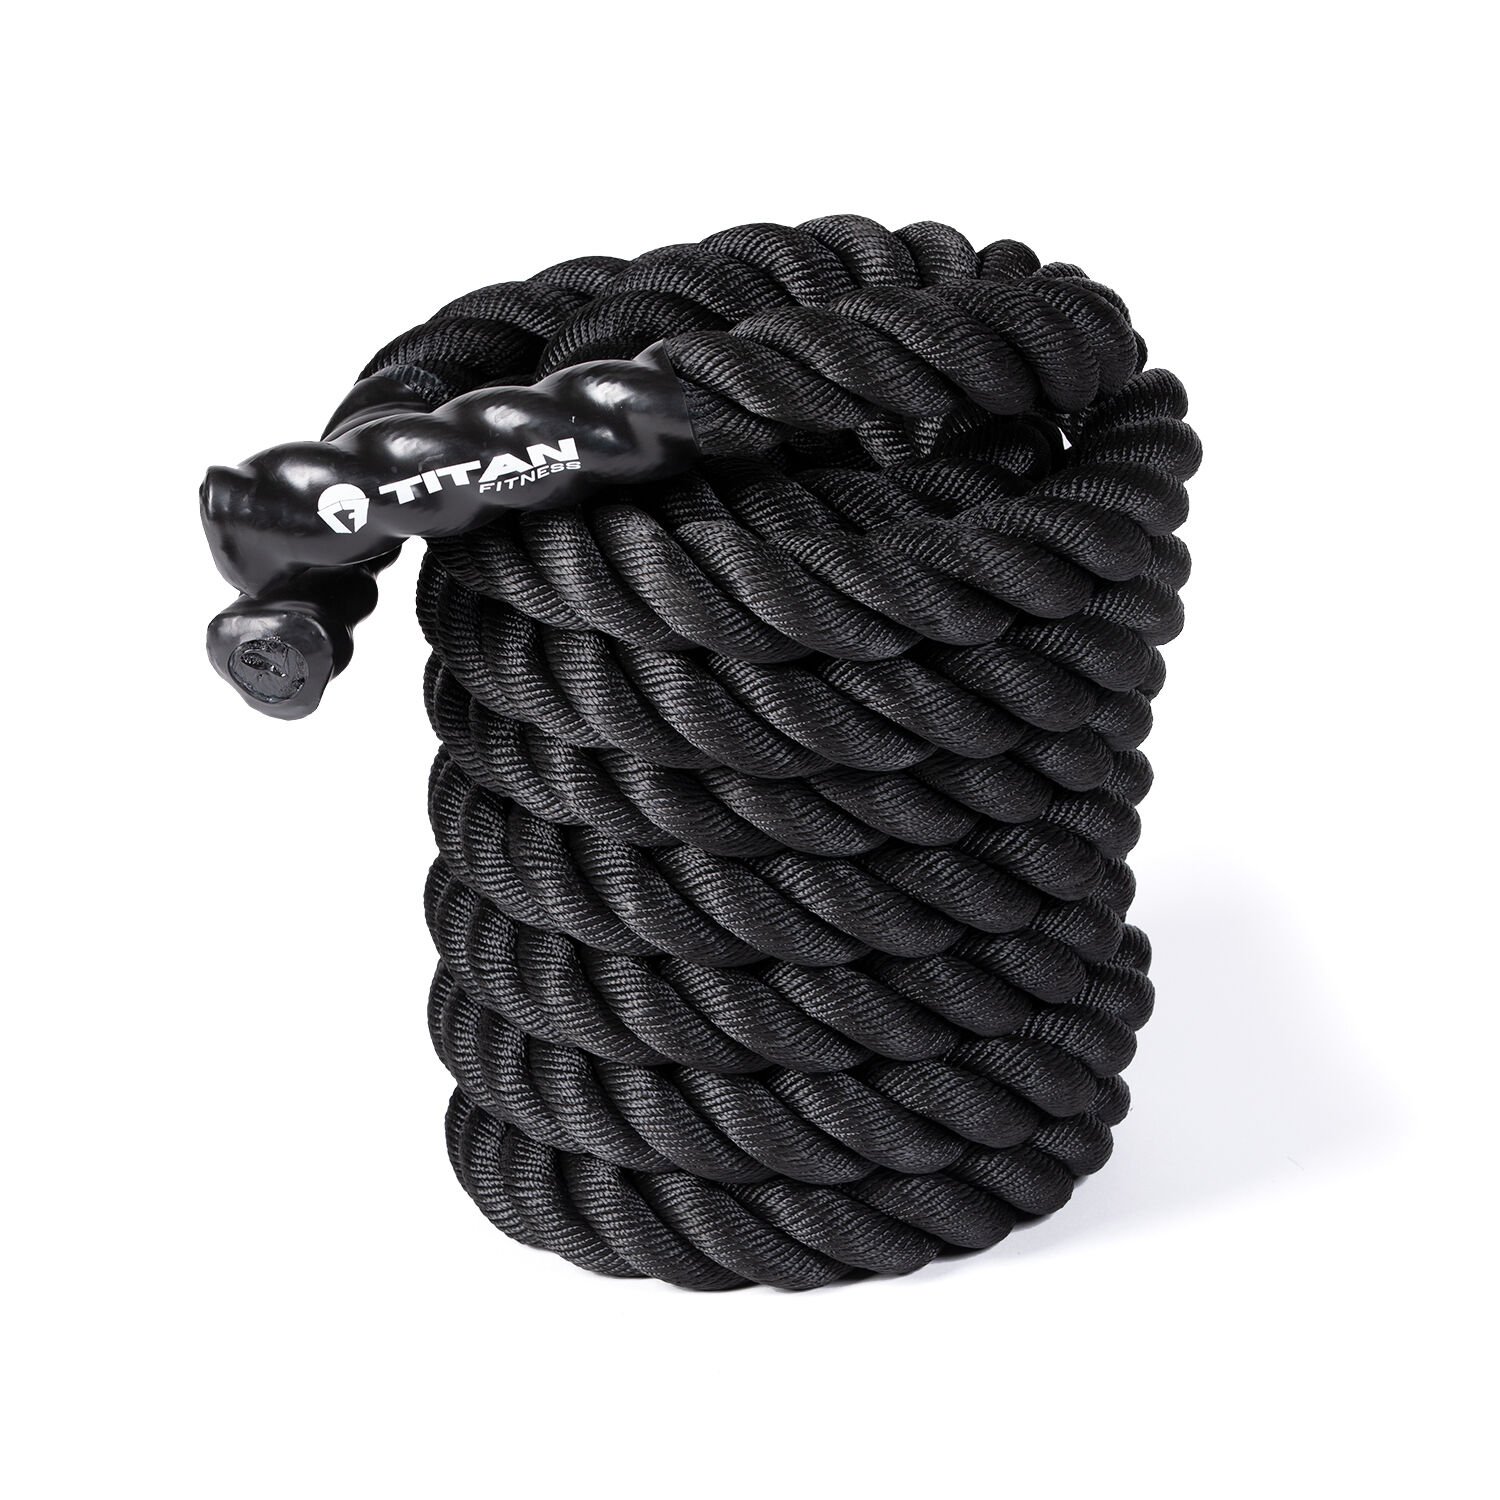 WORKOUT Rope 1 x 15 FT Finished Length Polydacron GYM with KNOTS for Climbing 